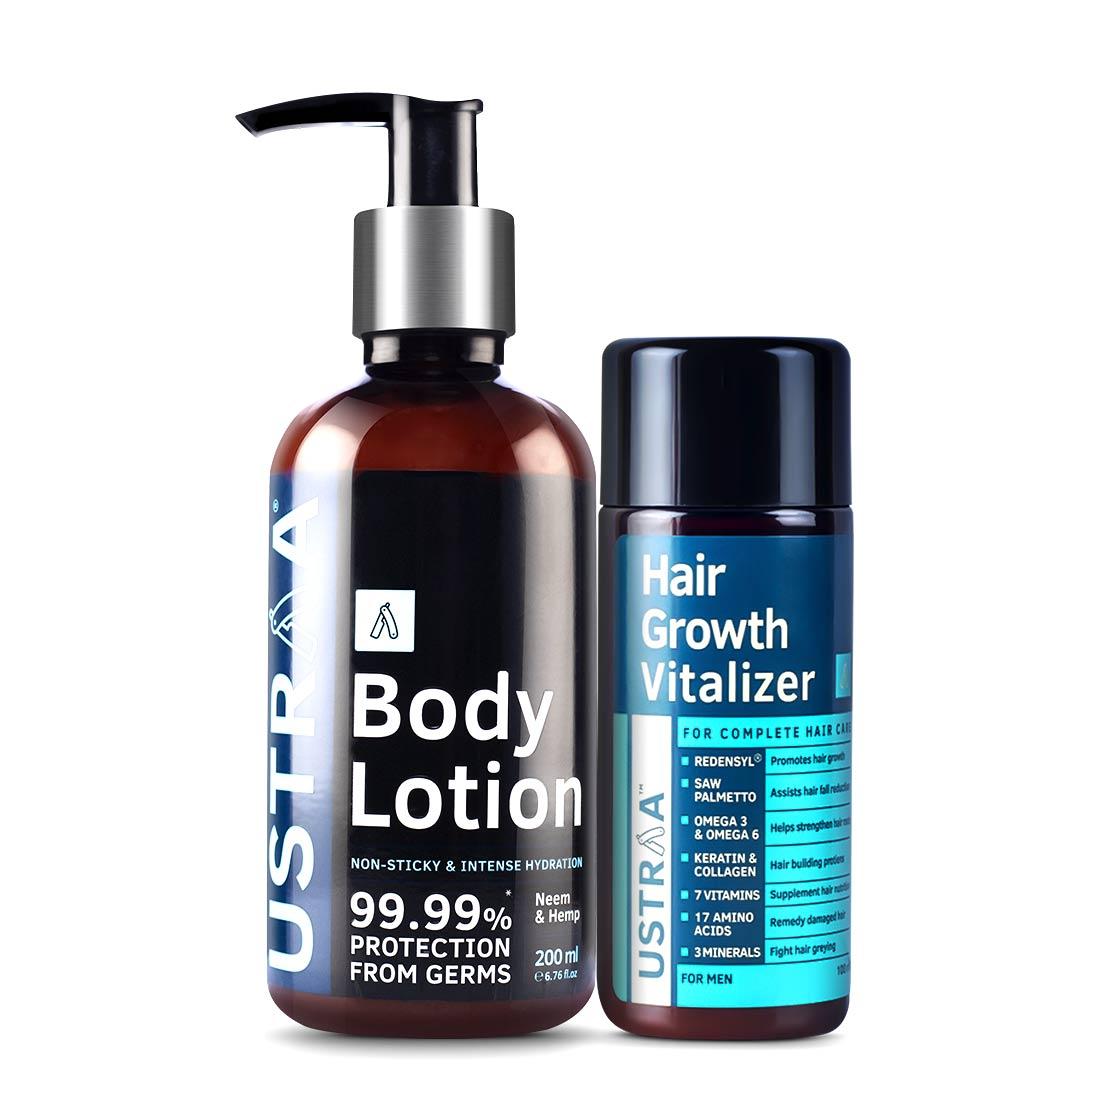 Hair Growth Vitalizer & Body Lotion Germ Protect